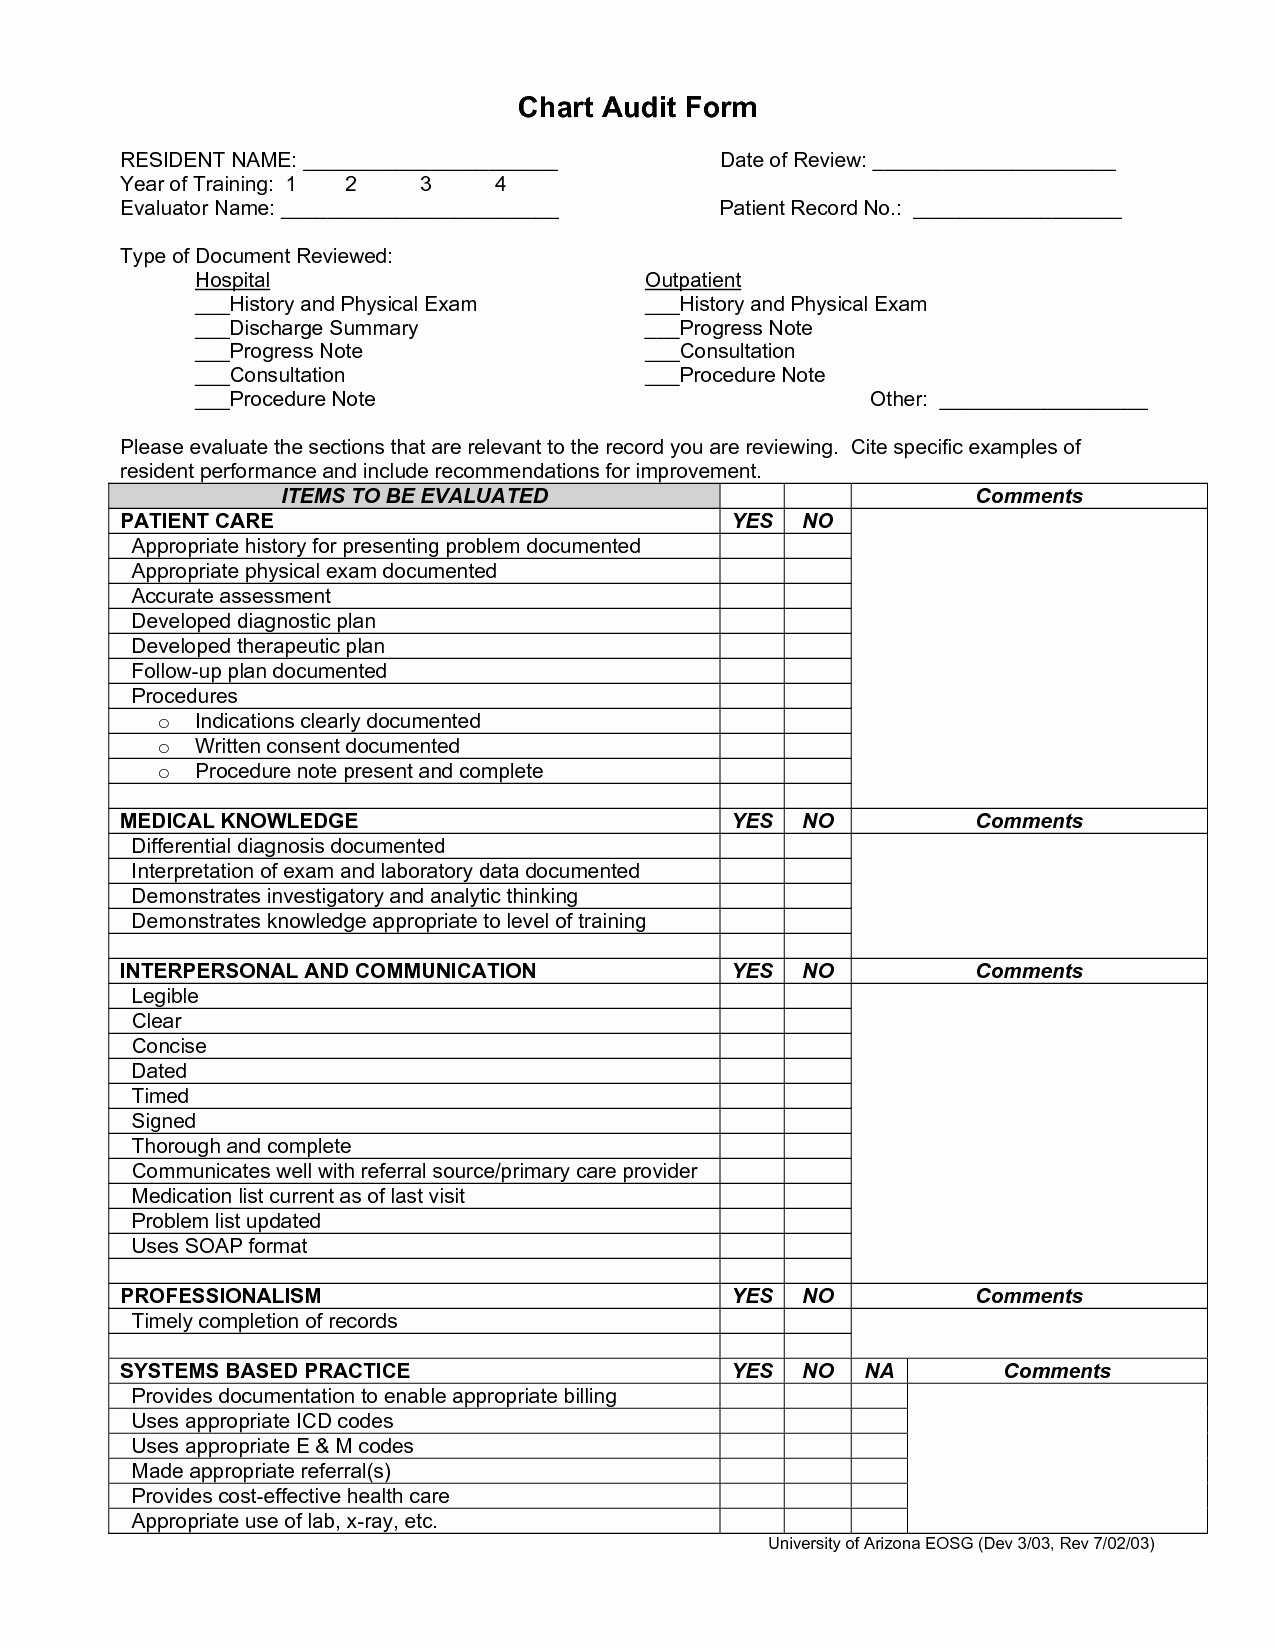 Nursing Peer Review Template New Brilliant Chart Audit form Template with Items Evaluate